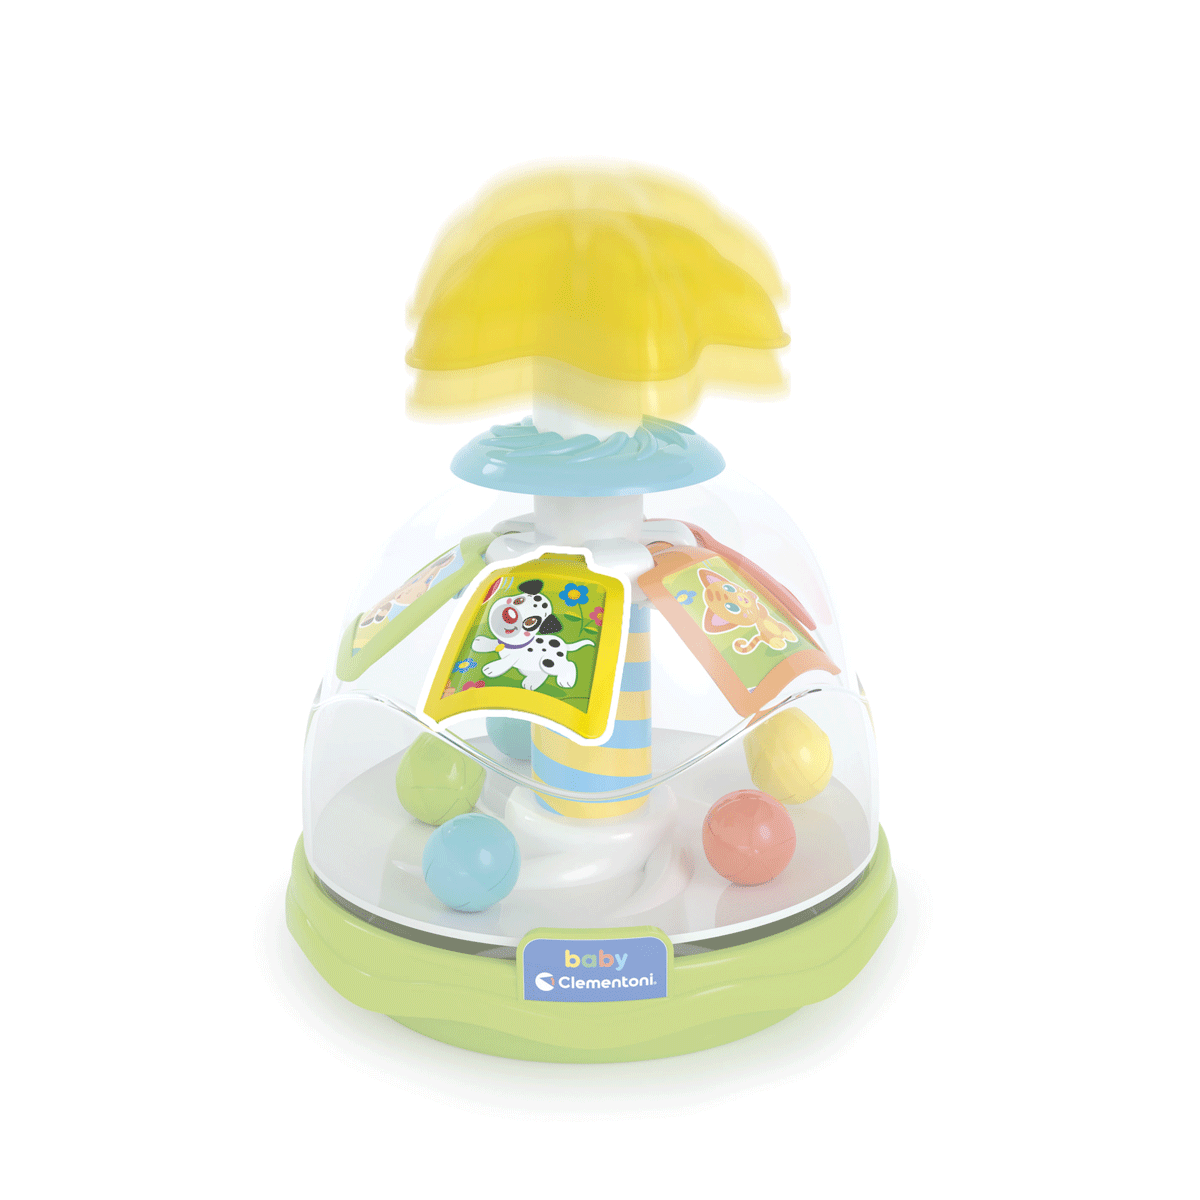 Clementoni - 17895 - happy friends spinning top - BABY CLEMENTONI